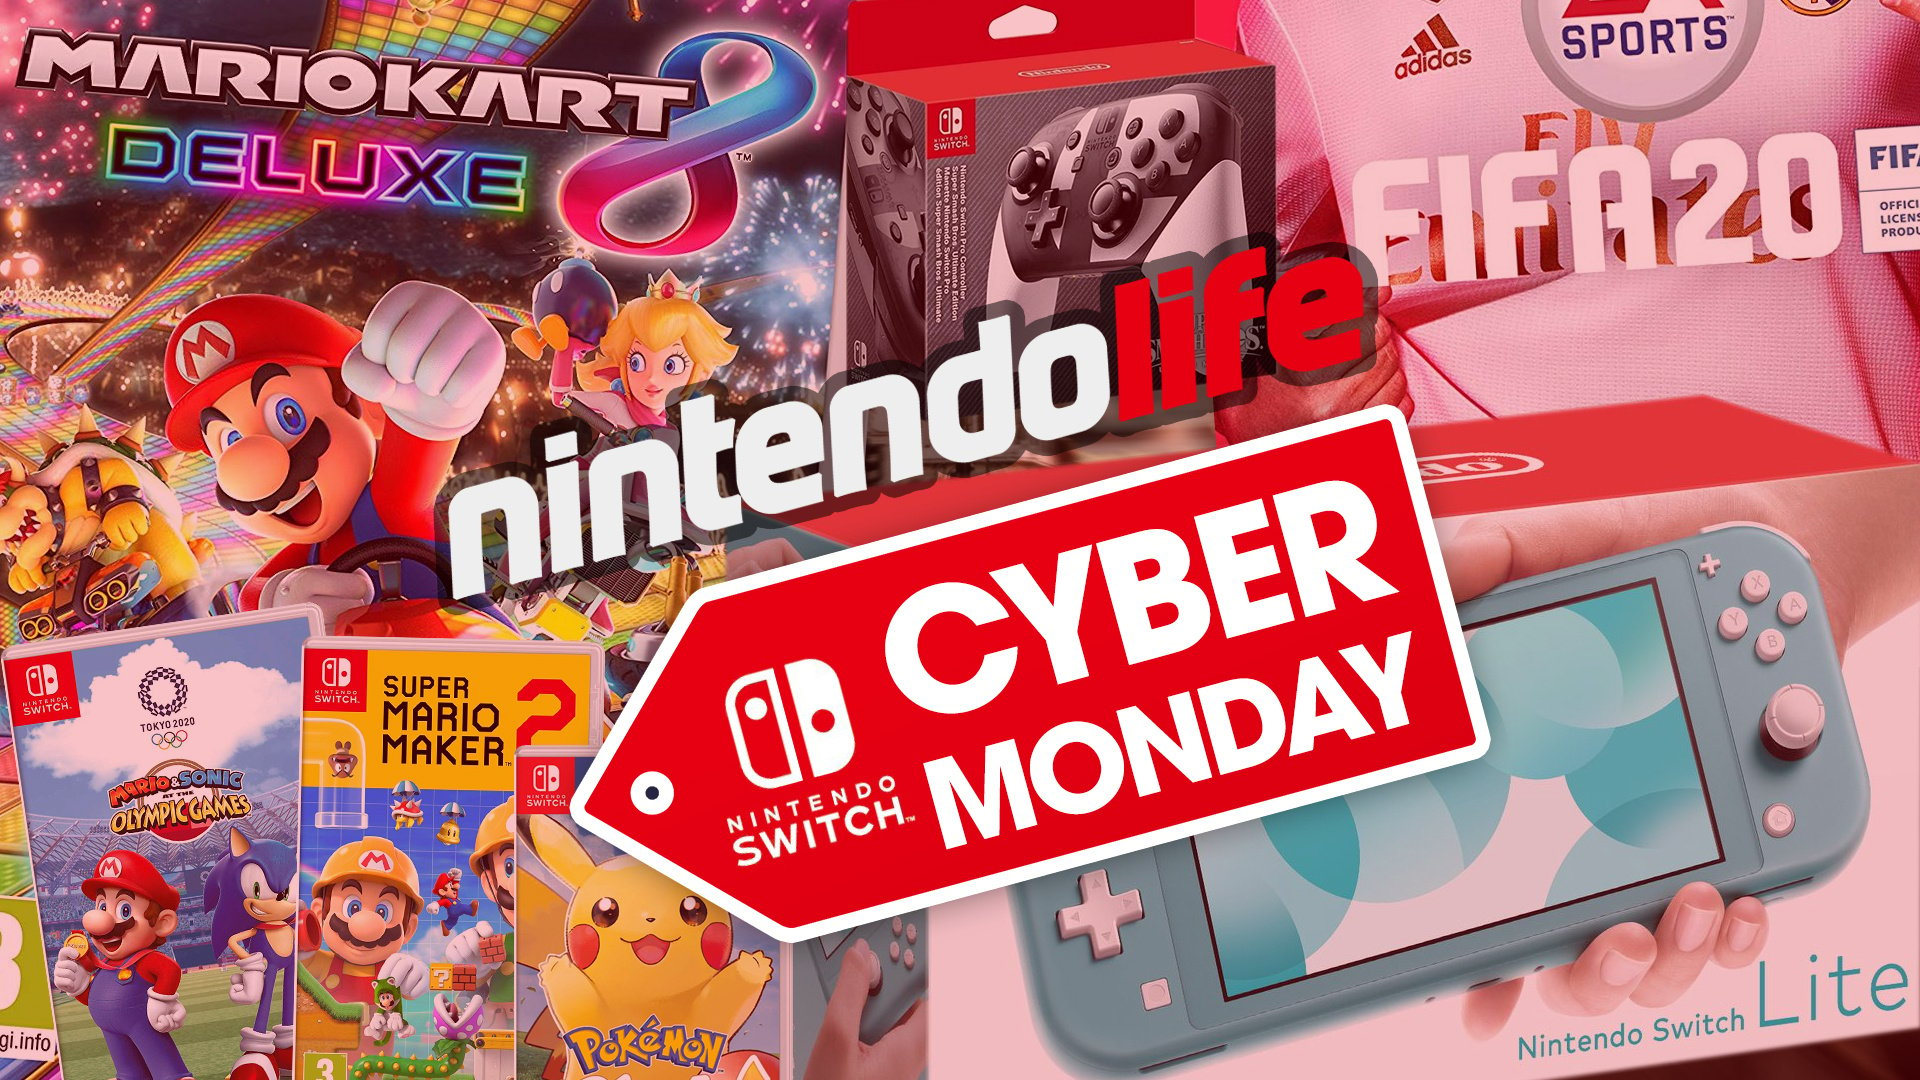 Nintendo Switch Cyber Monday And Black Friday Deals 2019: Console Bundles, Games, Micro SD Cards ...